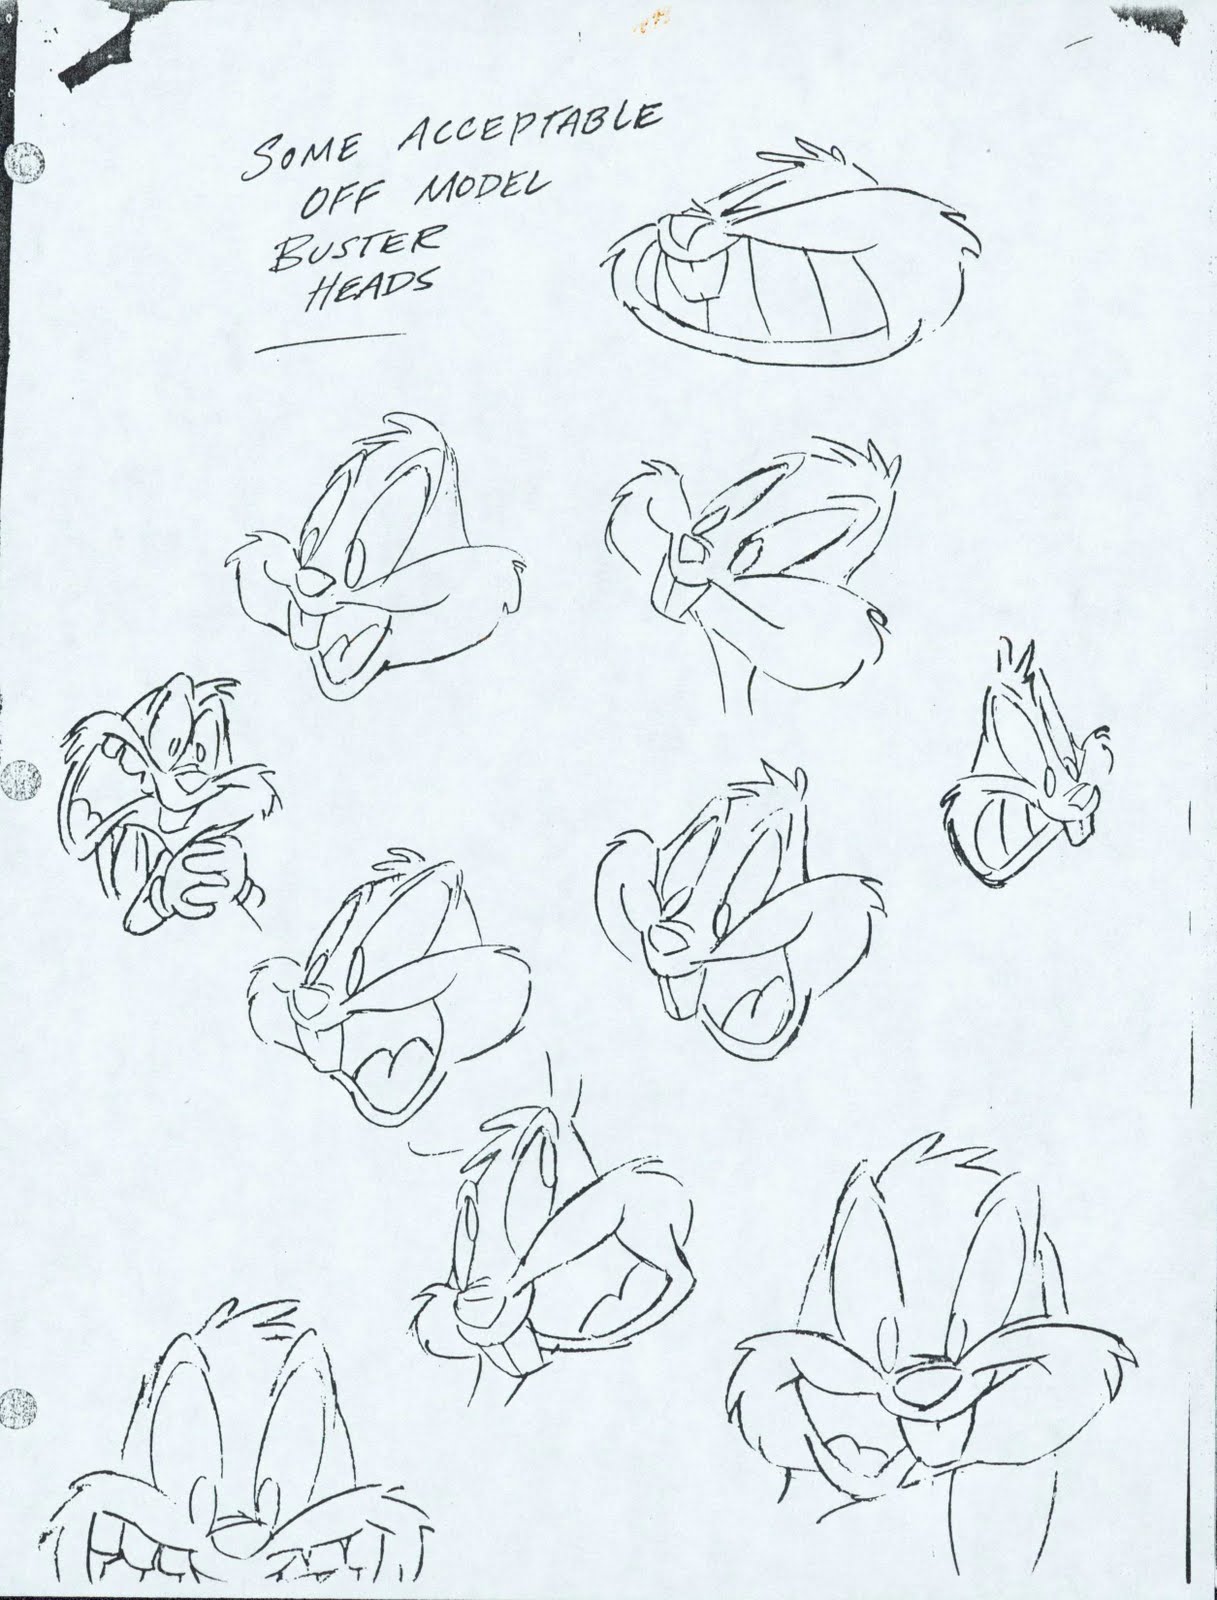 Buster from "Tiny Toon Adventures", 1990-1992